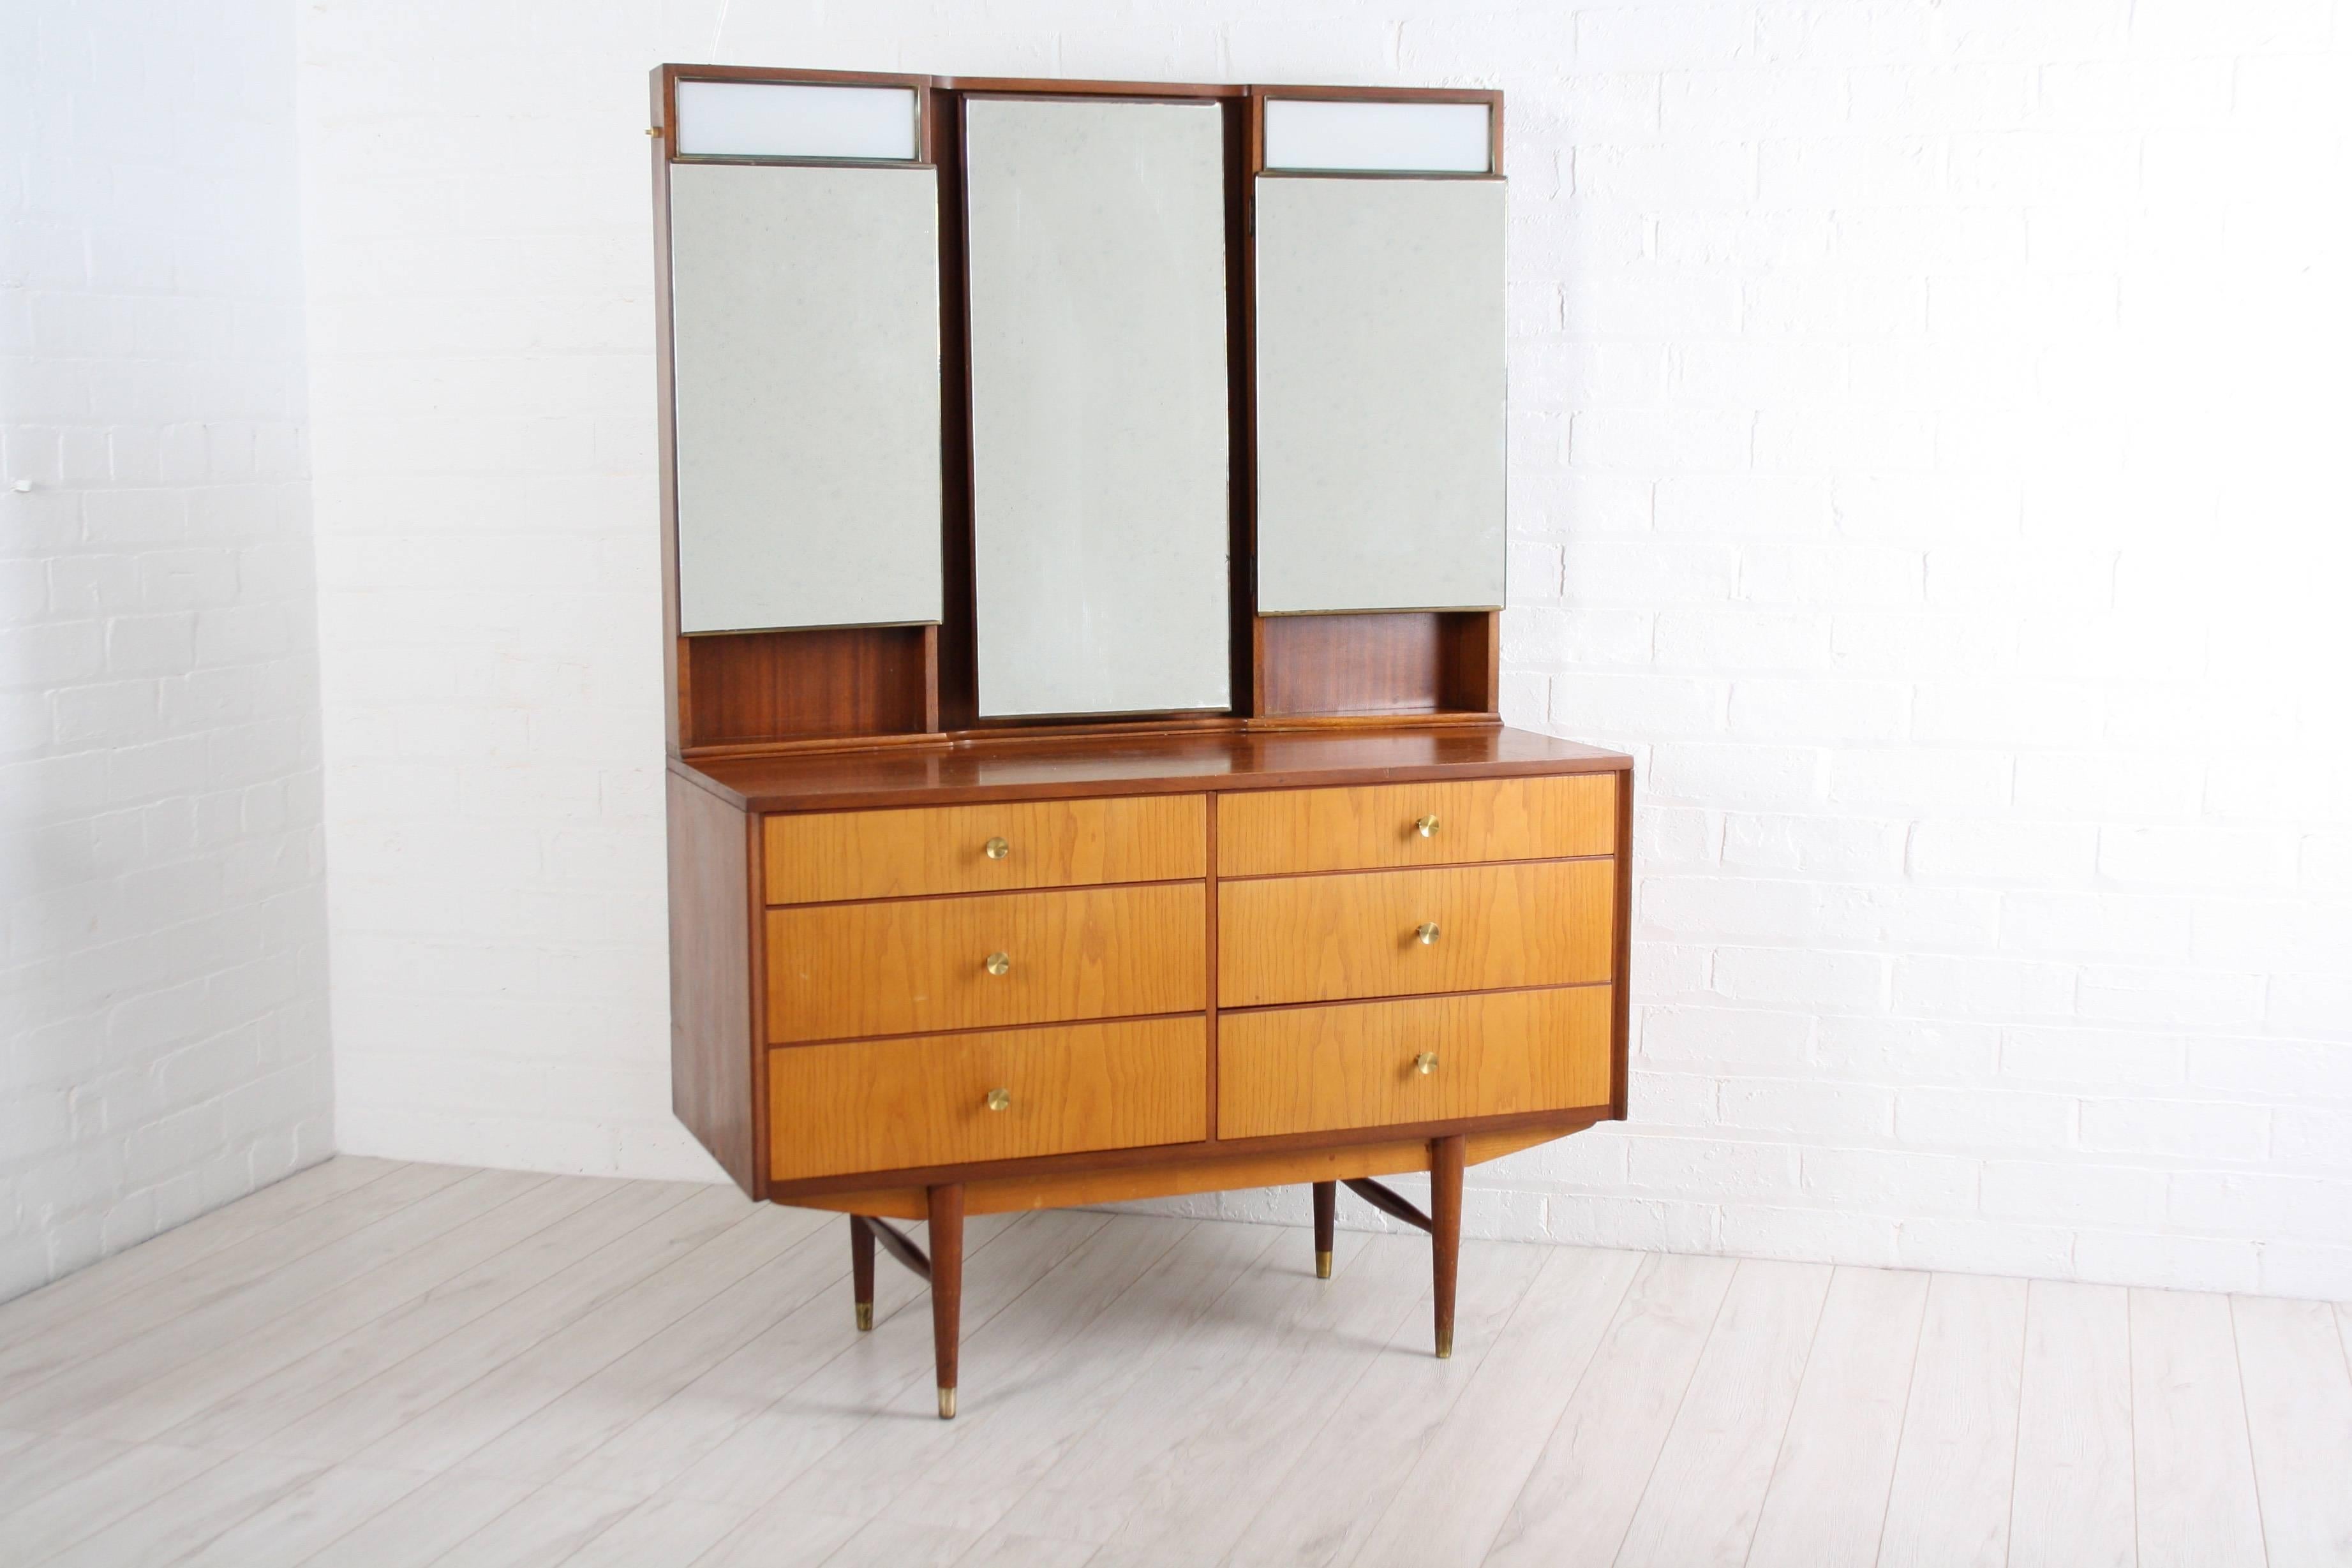 A beautifully sleek 1960s teak dressing table with a triple backlit mirror over an arrangement of six drawers on tapering legs. 

Handy hidden shelving behind the right and left mirrors and the light is in excellent working order with new wiring.